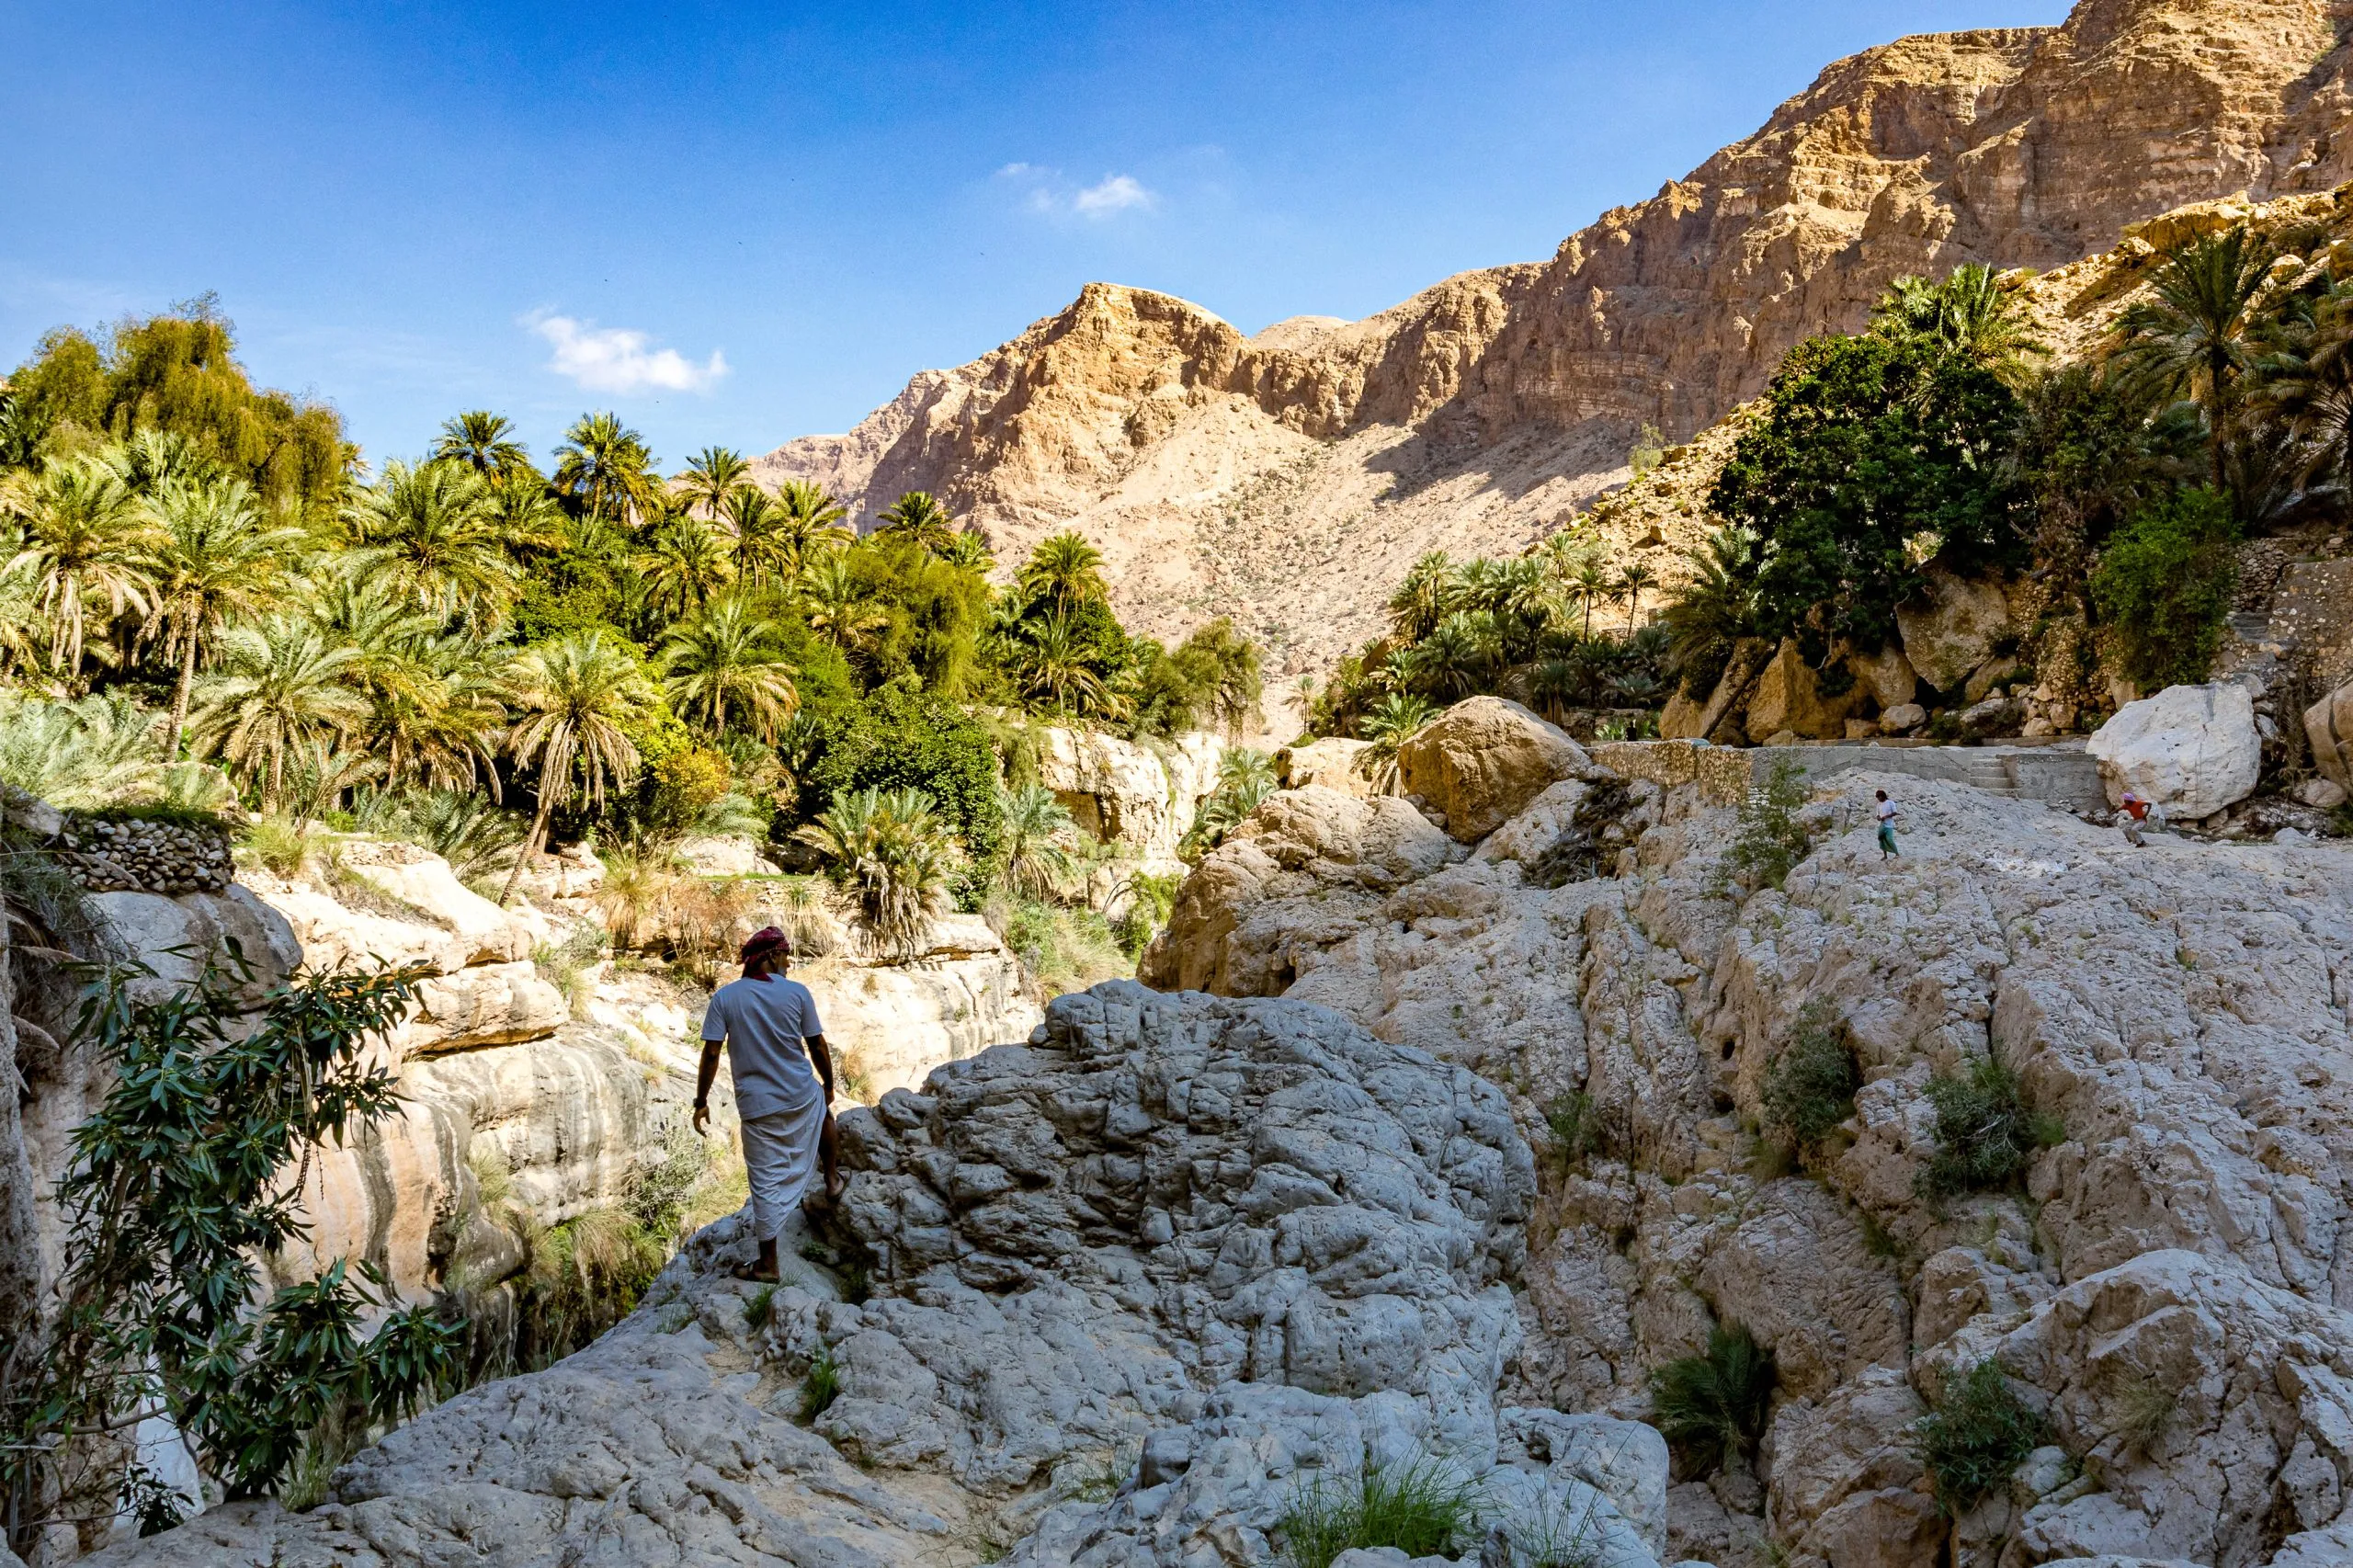 Wadi Shab river canyon, Sultanate of Oman. Natural mountain landscape with green water river and vertical rocky cliffs.